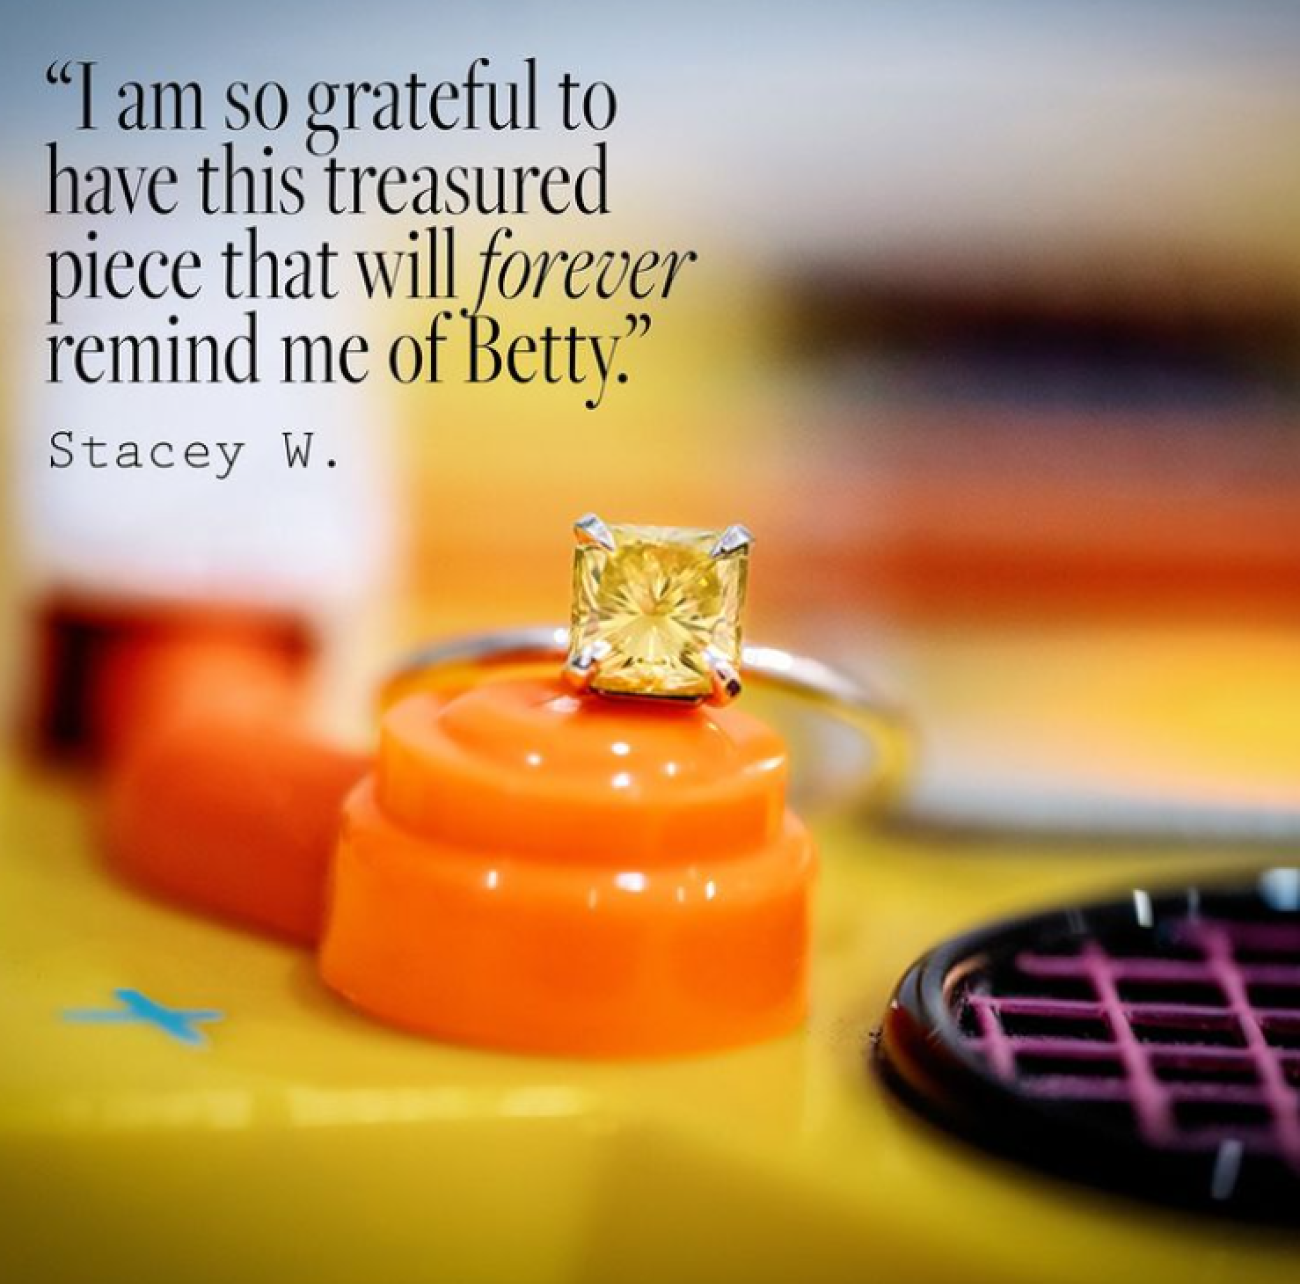 An ad with a ring that says "I am so grateful to have this treasured remind me of Betty"piece that will forver